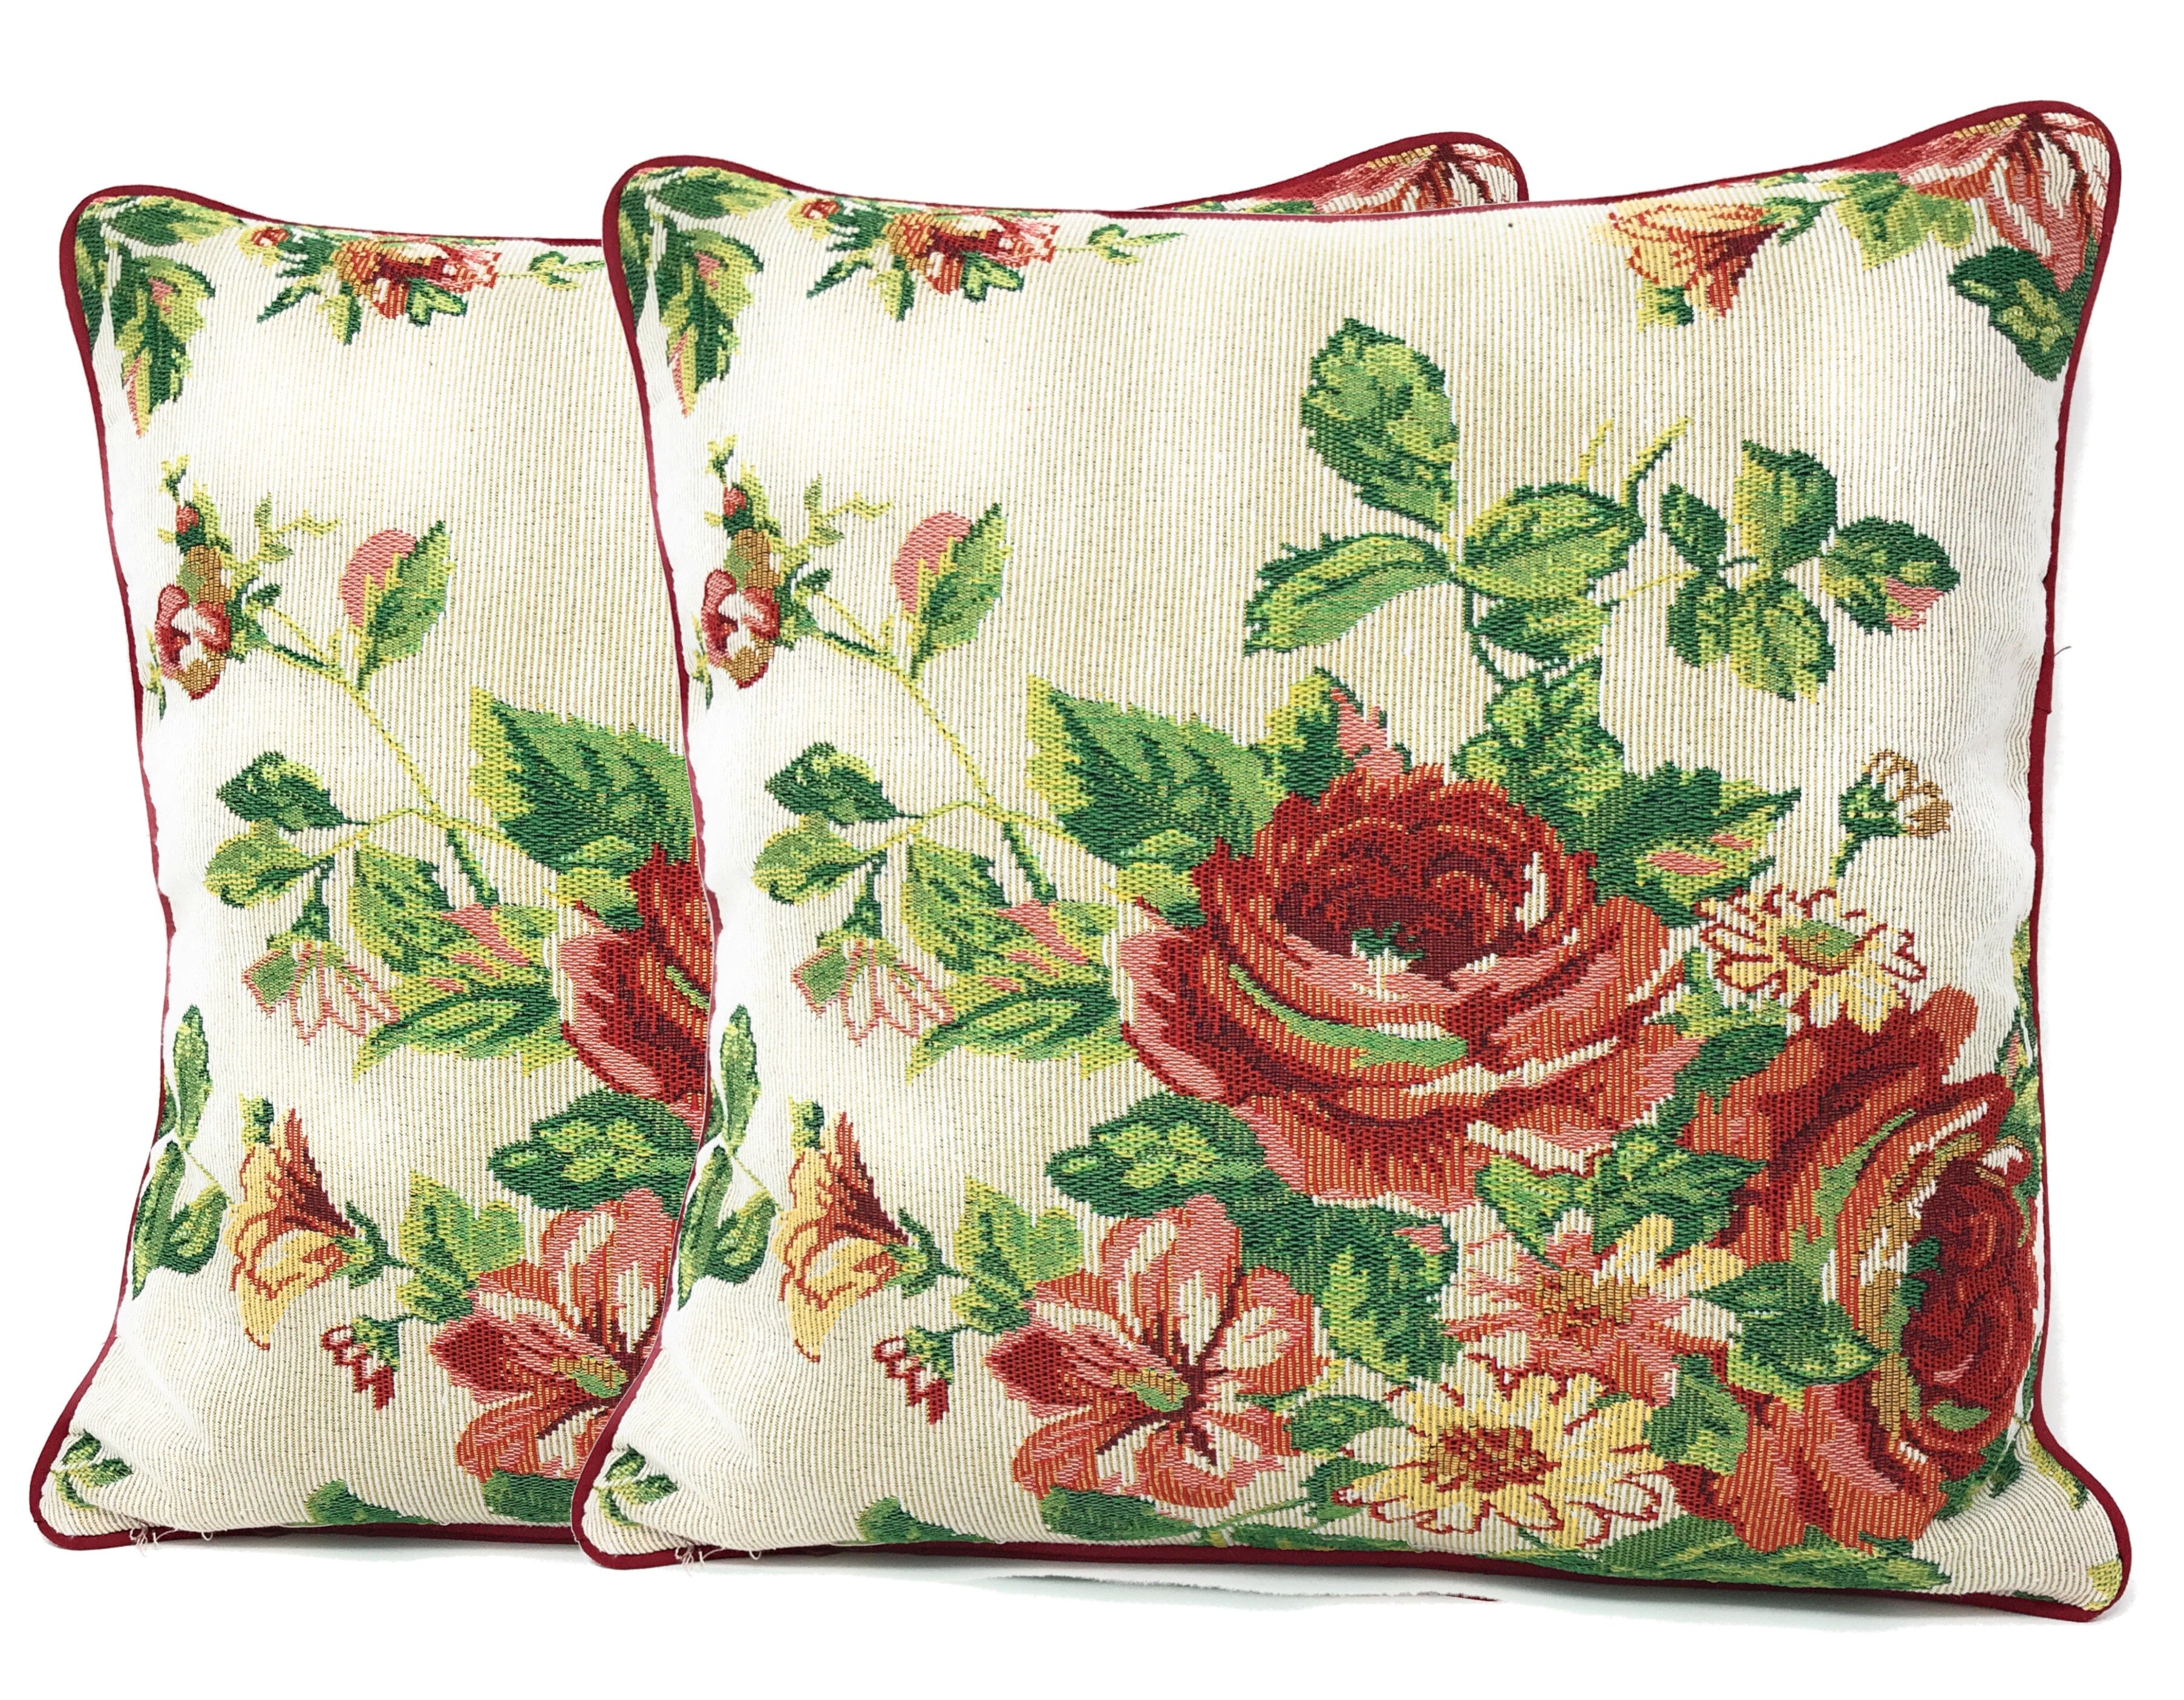 Tache Sweet Roses Vintage Ivory Woven Tapestry Throw Pillow Cover (17593CC) - Tache Home Fashion